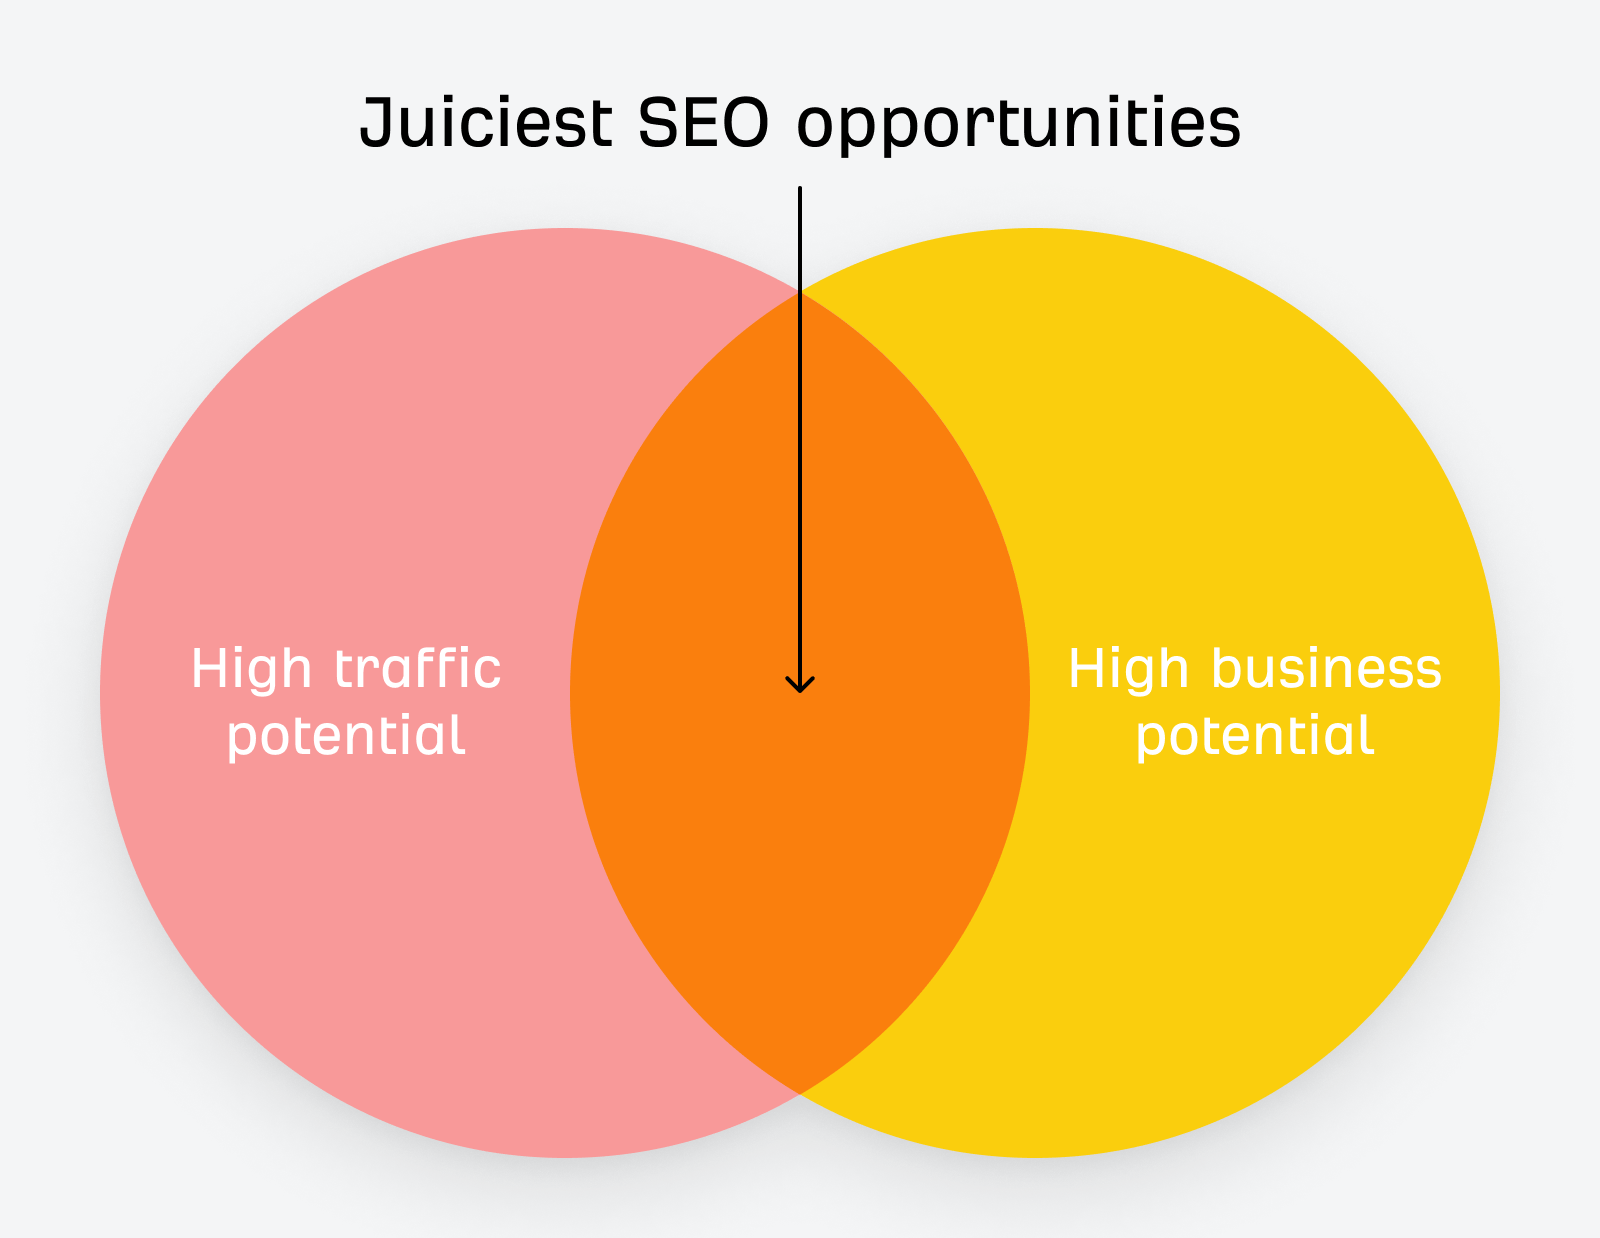 How to find the juiciest SEO opportunities